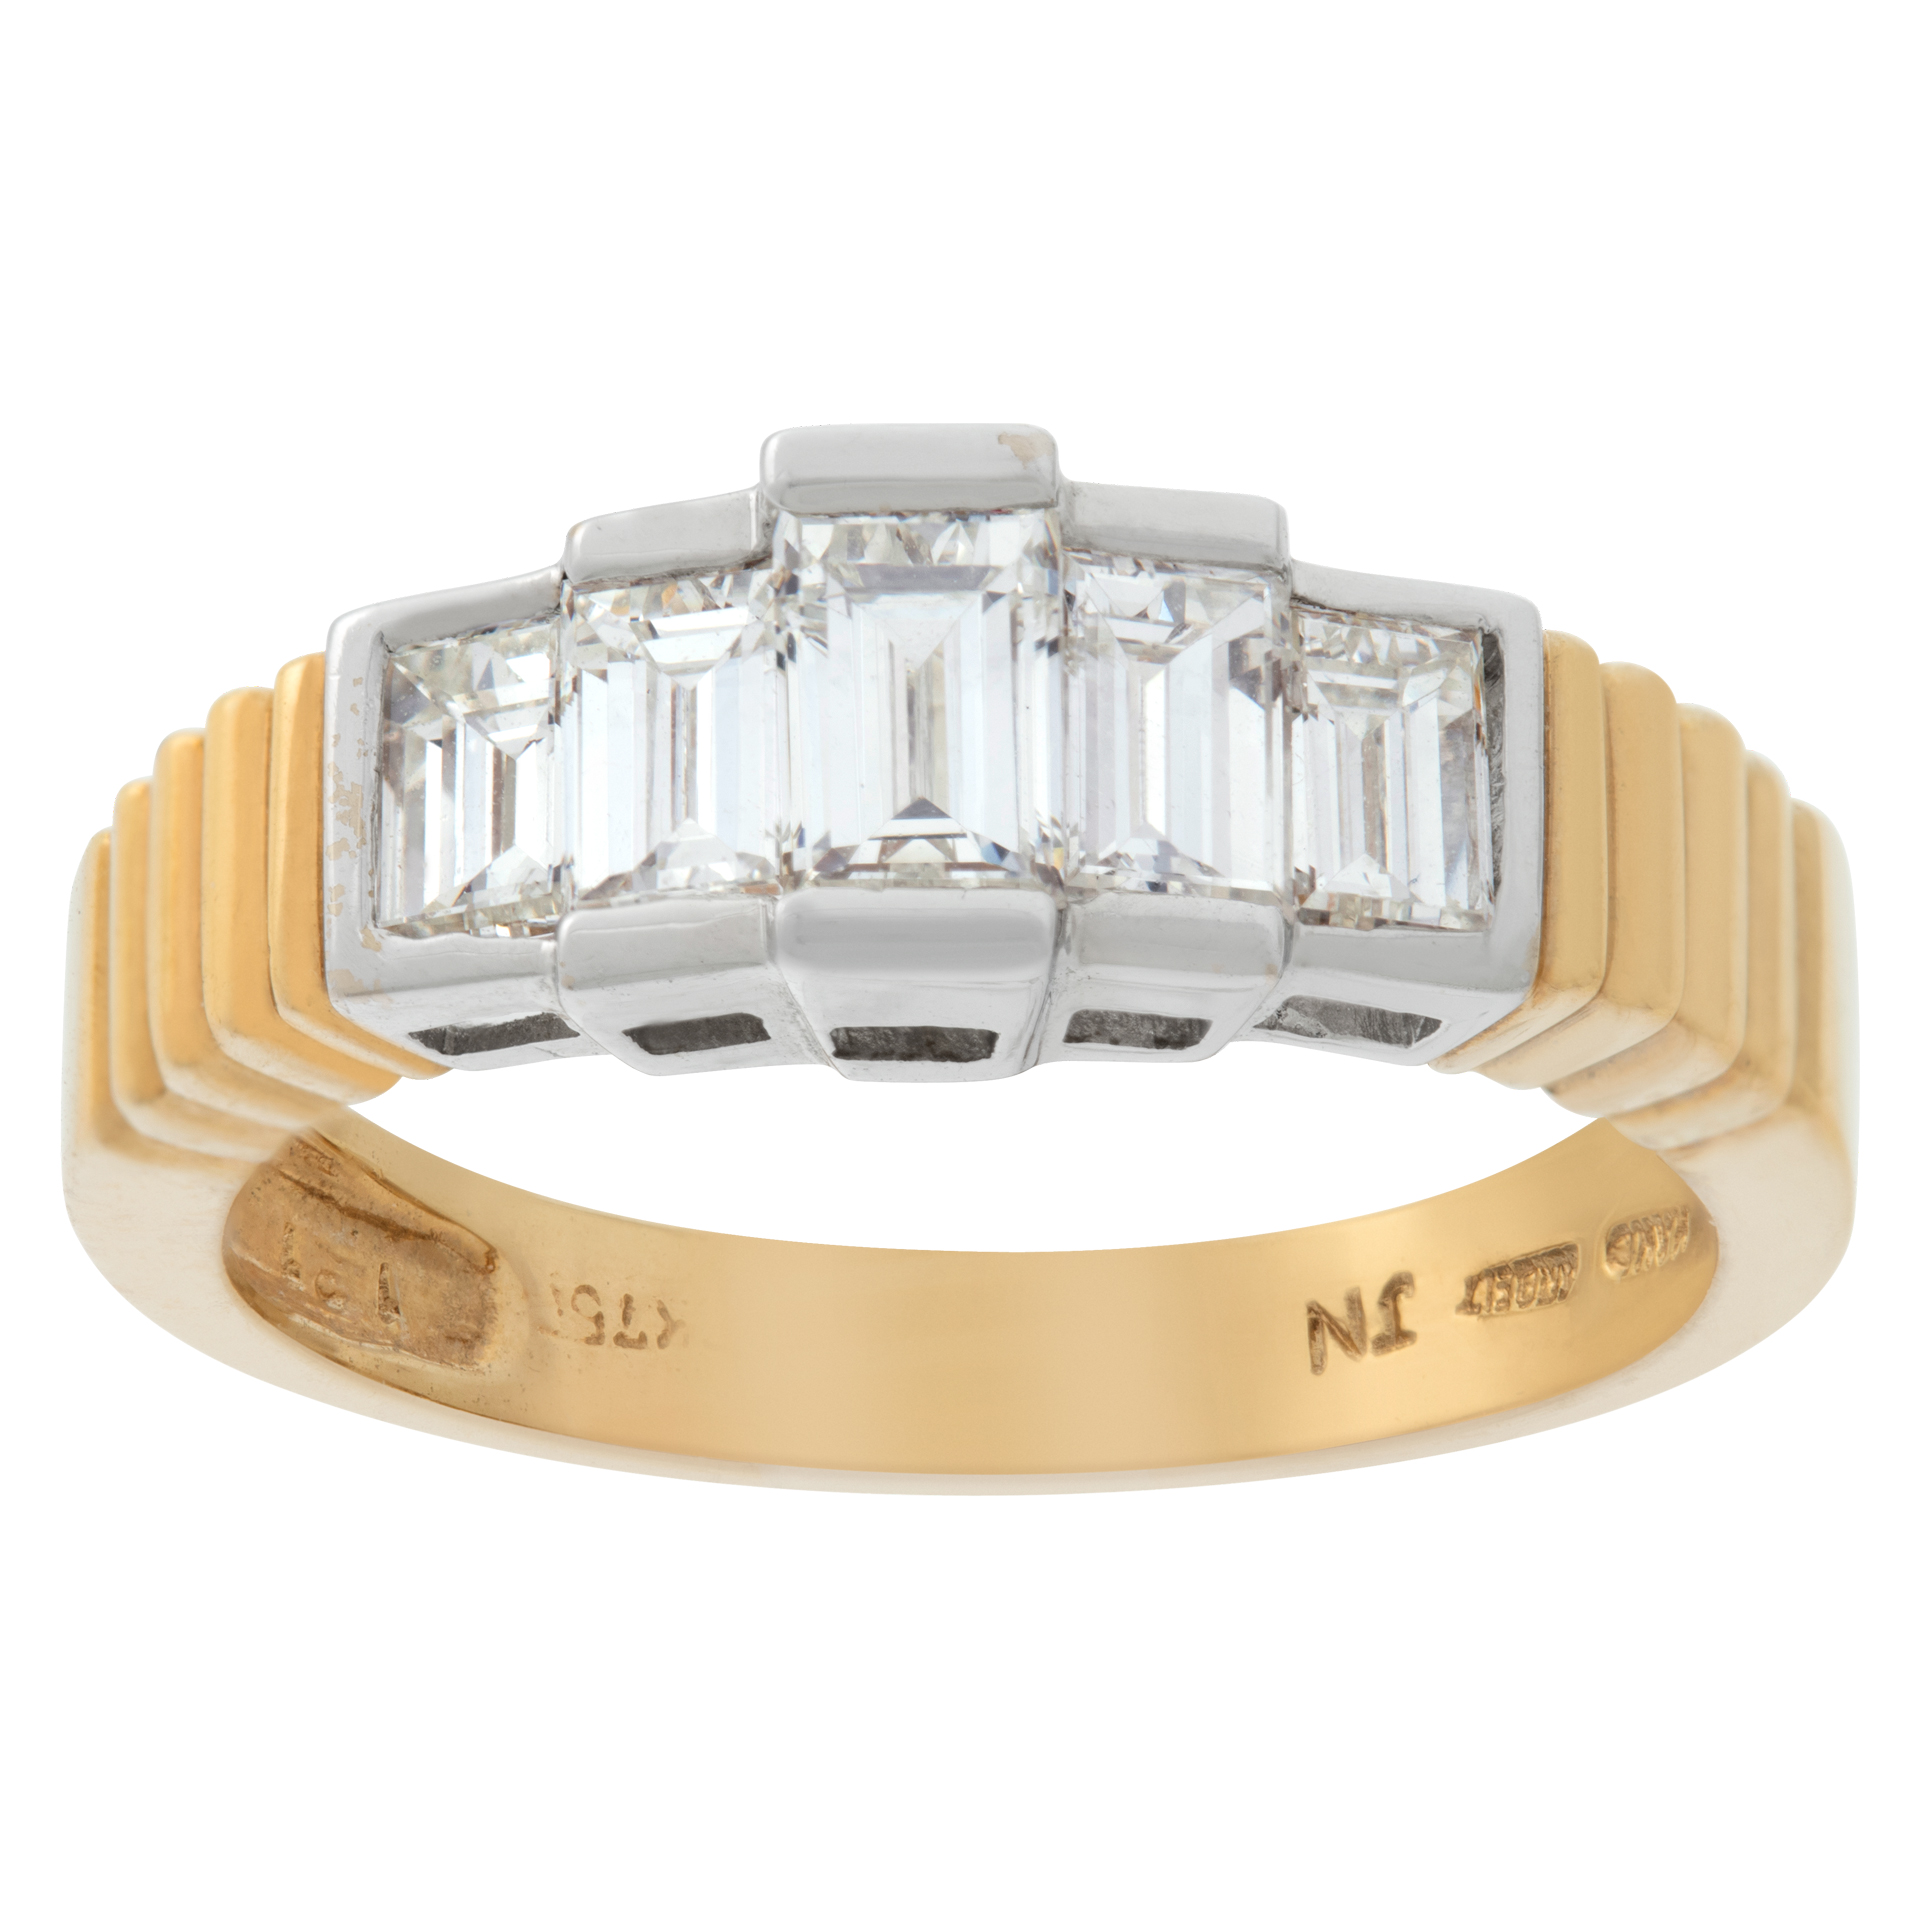 Emerald cut channel set diamond ring with 5 diamonds 18k white and yellow gold